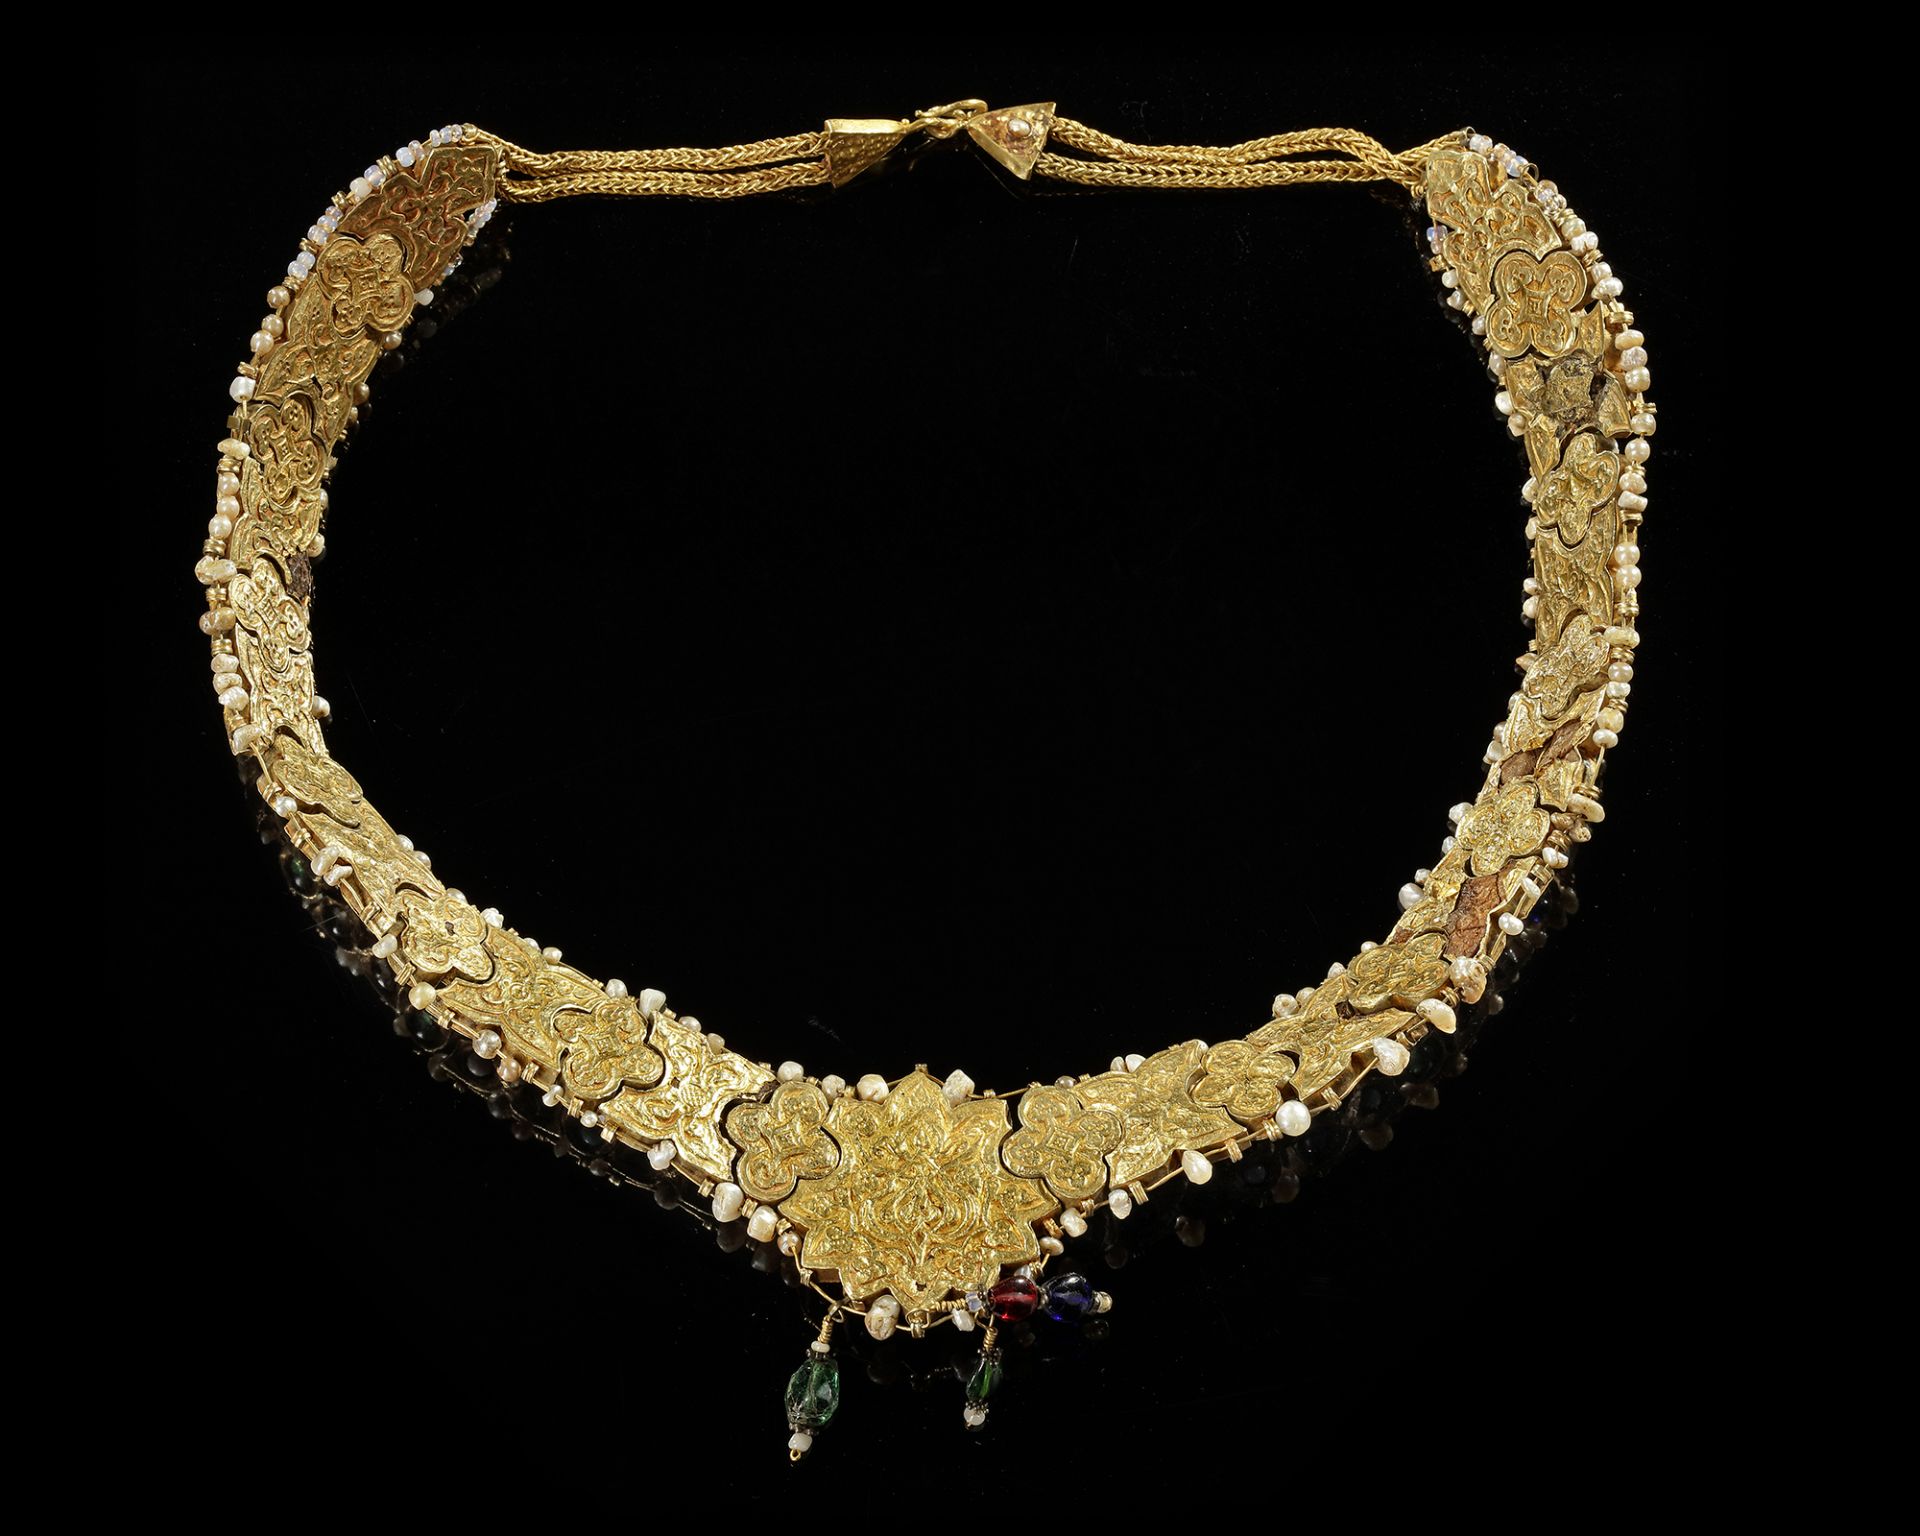 A MUGHAL GEM-SET ENAMELED GOLD NECKLACE, LATE 18TH CENTURY - Image 5 of 8